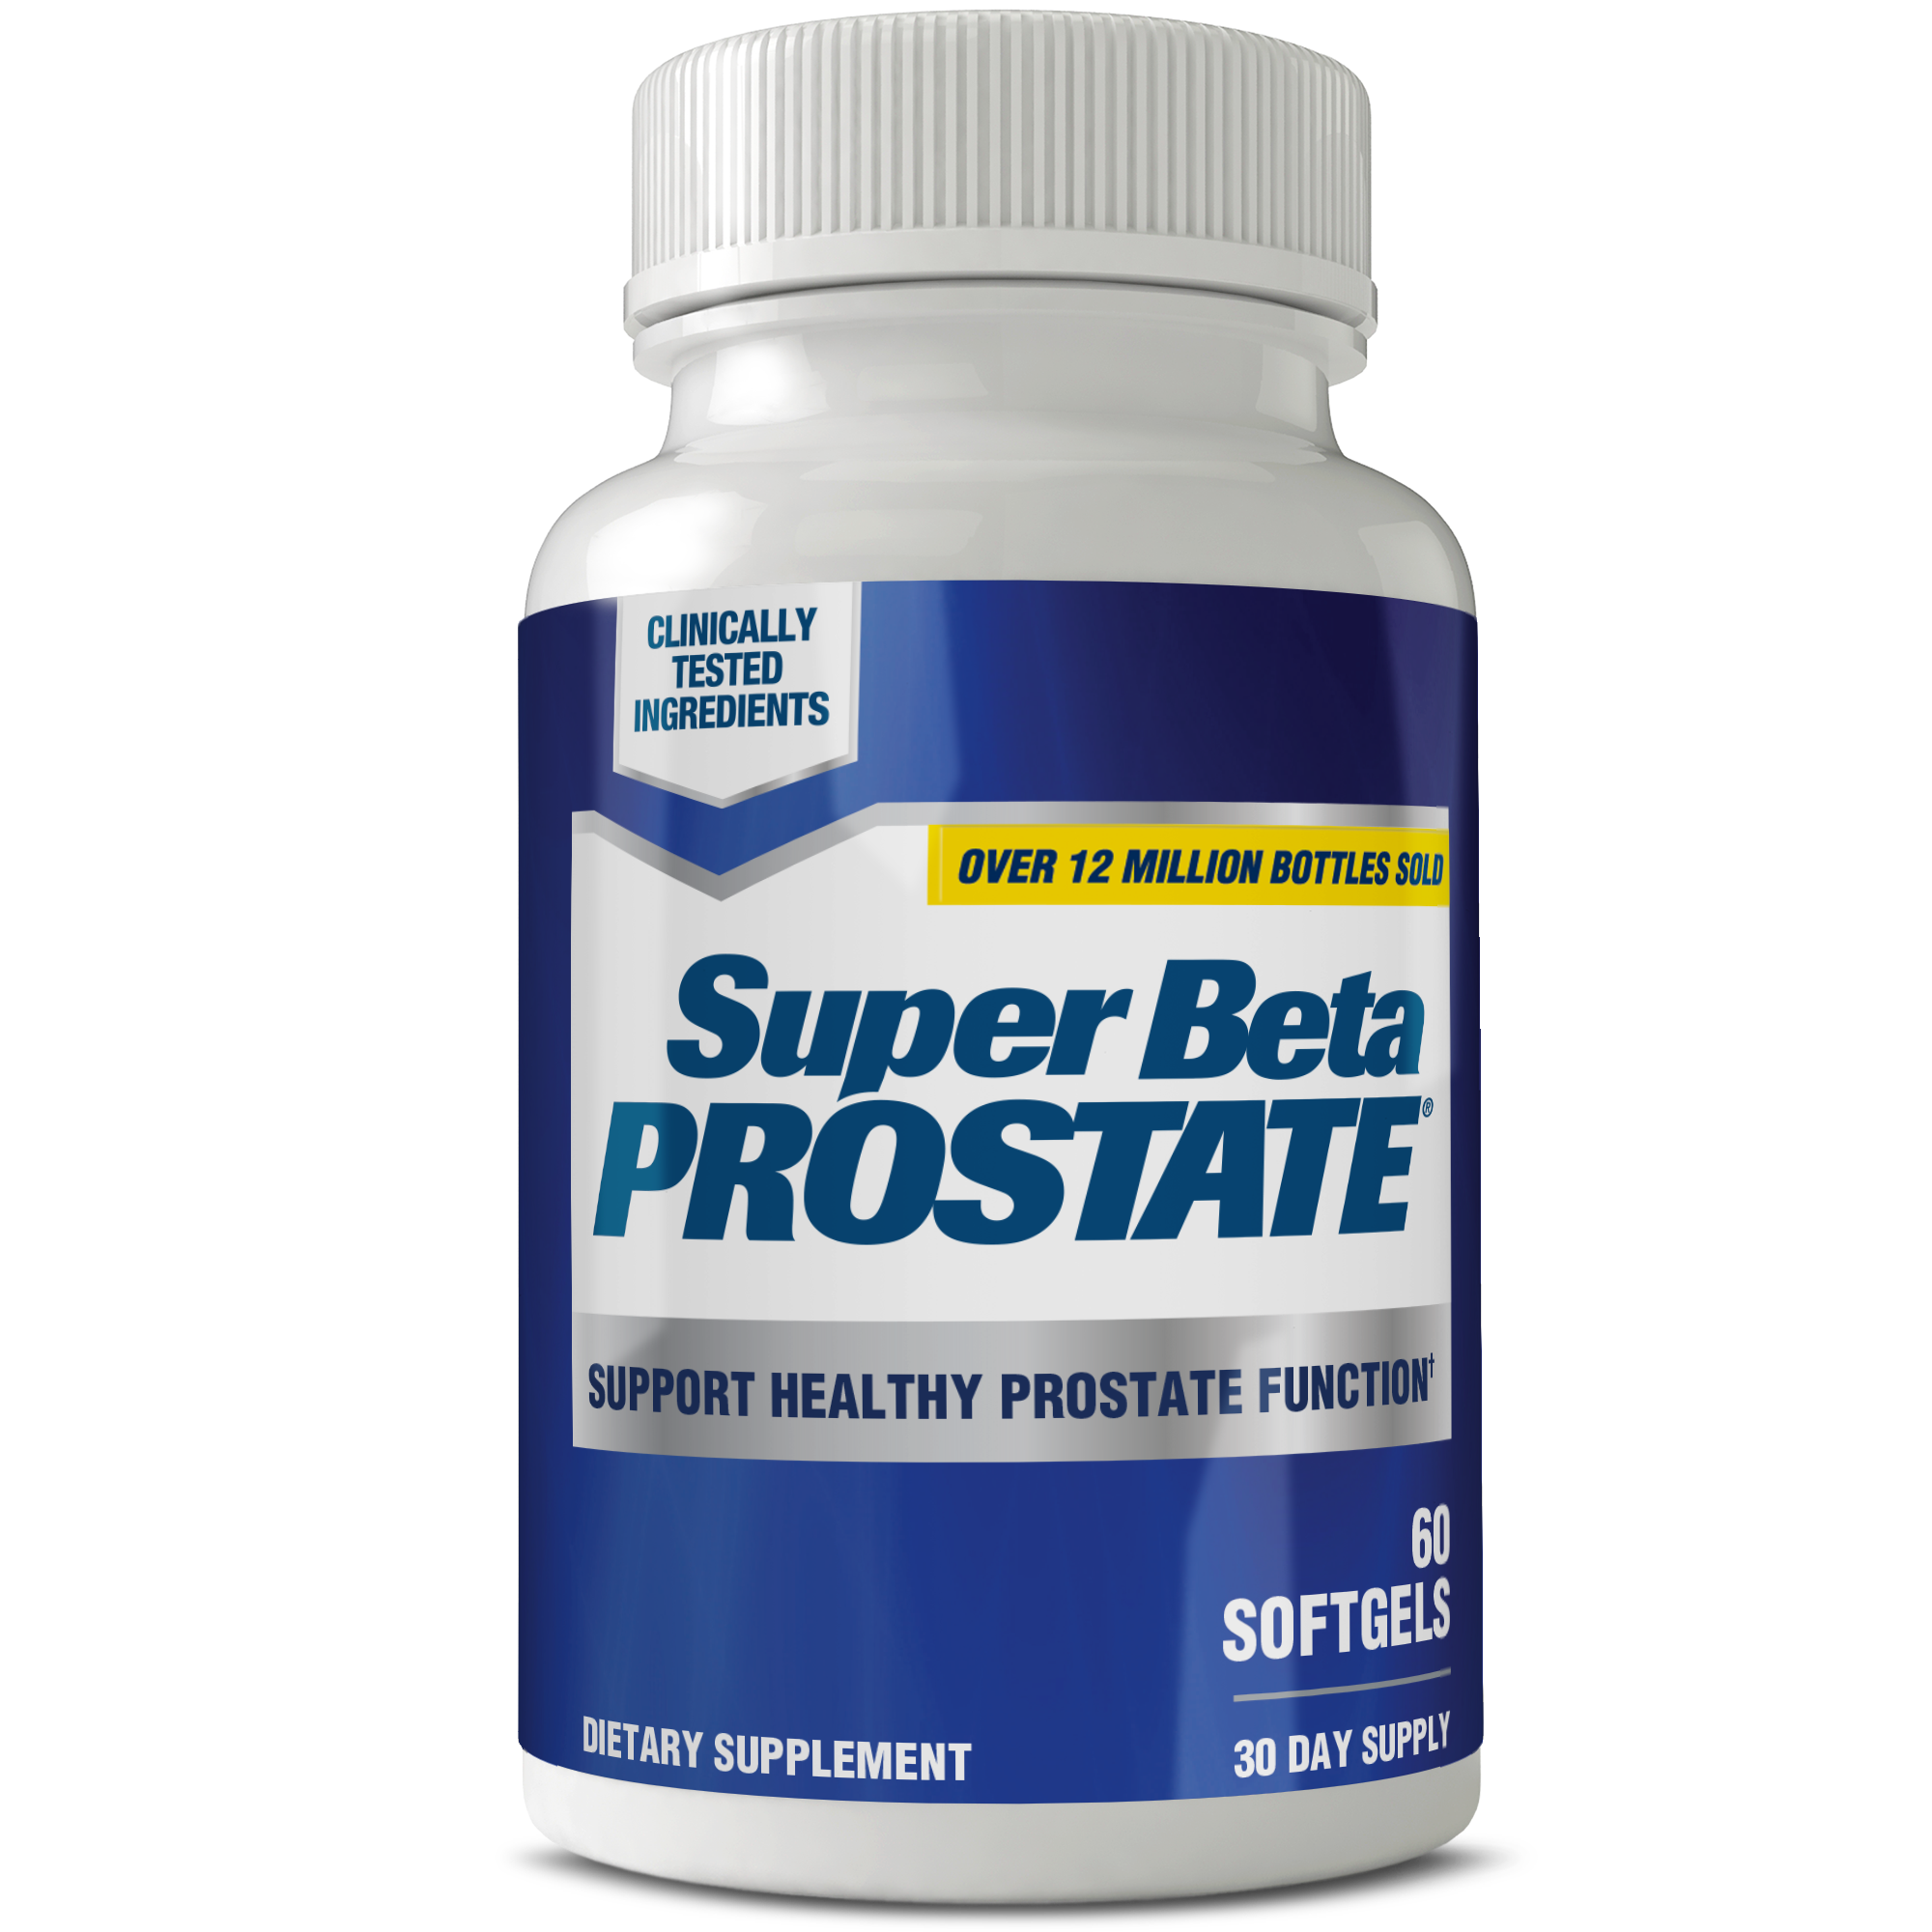 Super Beta Prostate with Beta Sitosterol & Vitamin D3 ...